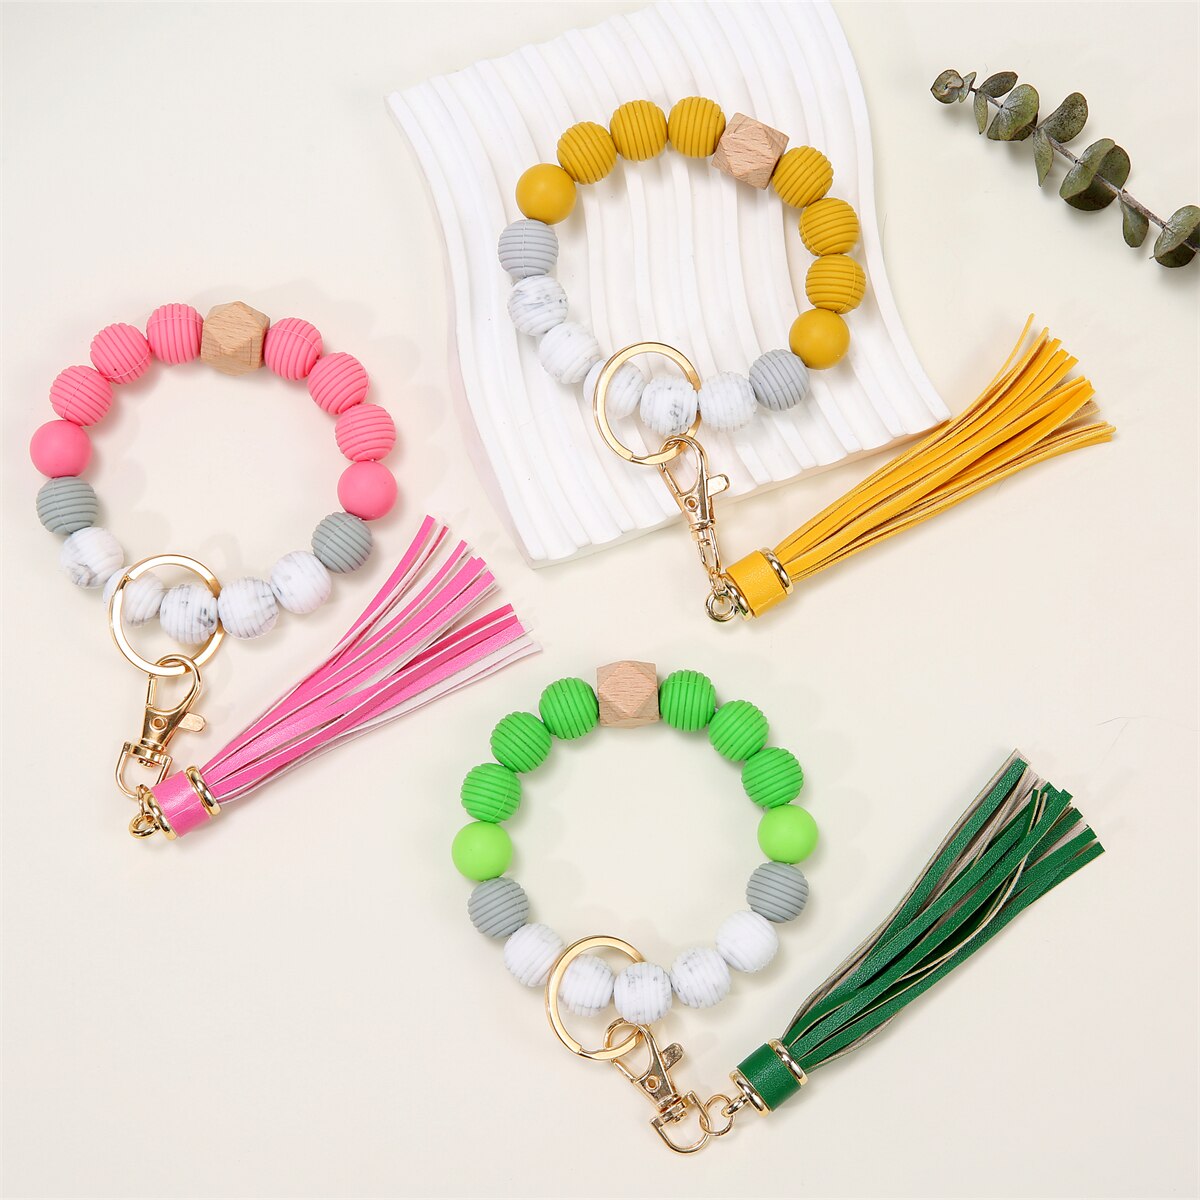 Silicone Key Ring Bracelet Wristlet Keychain Unique Beaded Bangle Key Chains for Women with Leather Tassel